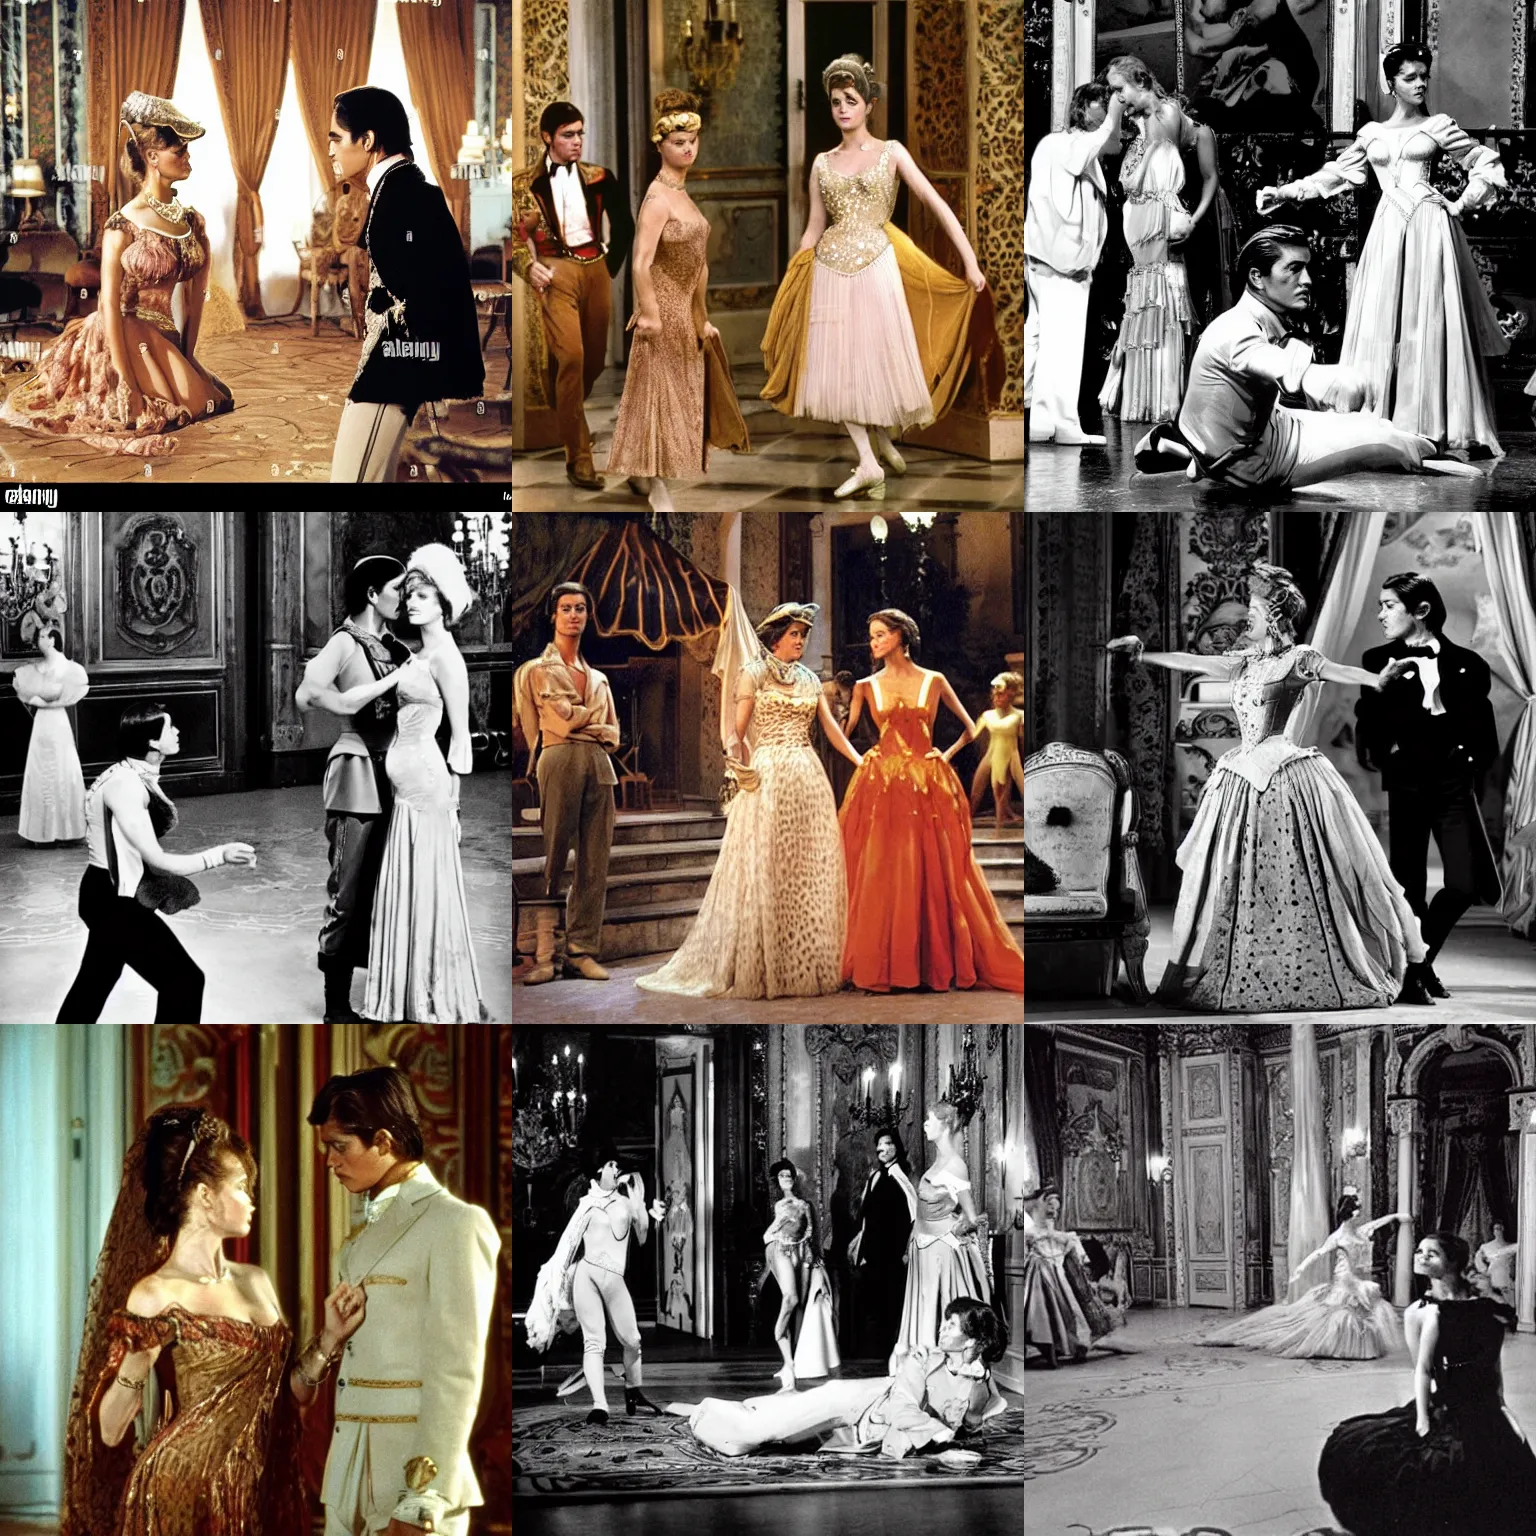 Prompt: ballroom scene from the leopard by luchino visconti with alain delon and claudia cardinale. alain delon is dressed as a soldier and claudia cardinale is dressed as venus in birth of venus. set in the 1 9 th century in an italian villa. technicolor!!!!, highly intricate, 5 0 mm